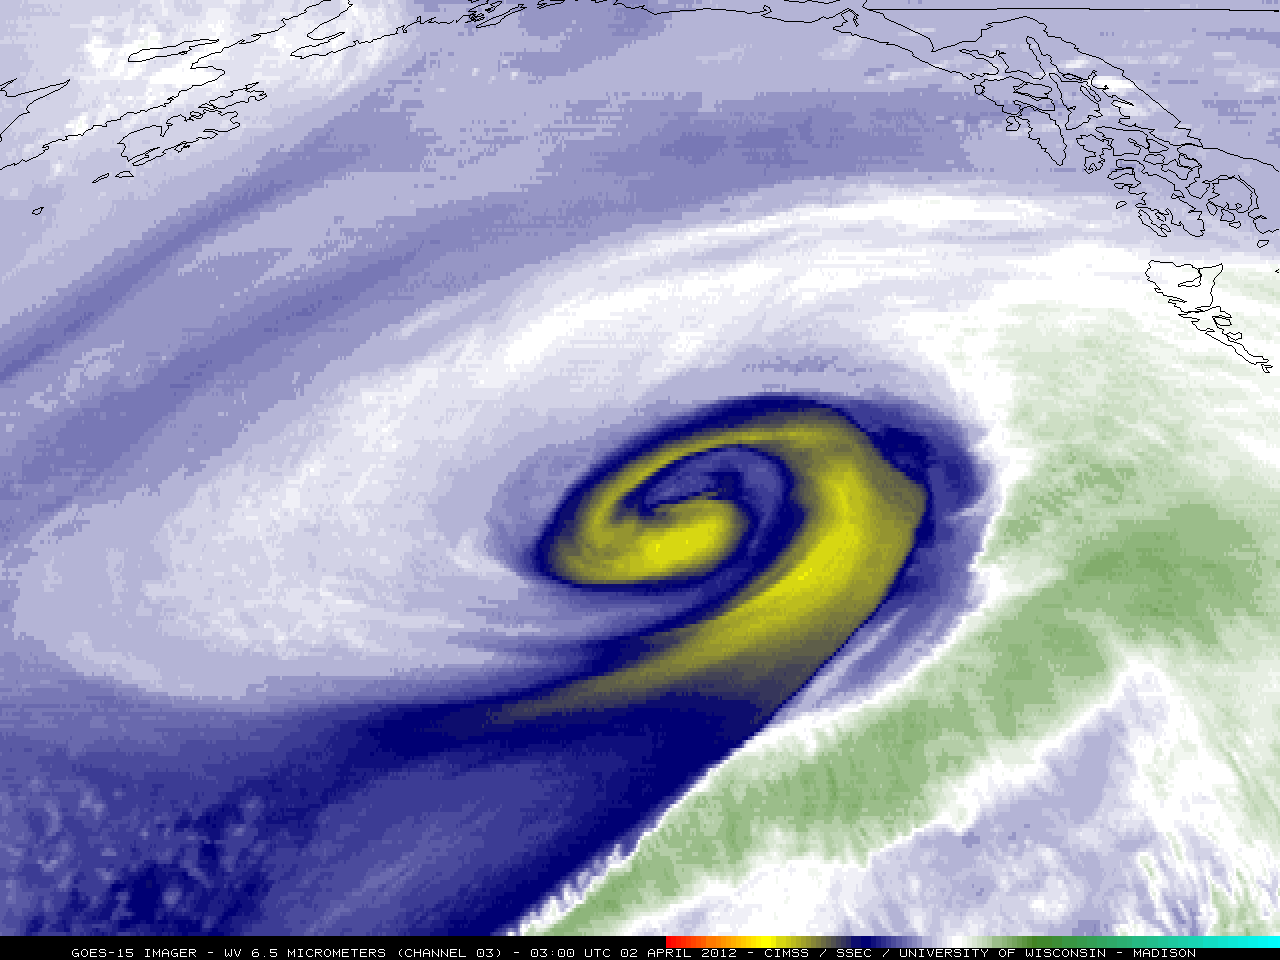 GOES-15 6.5 Âµm water vapor channel images (click image to play animation)